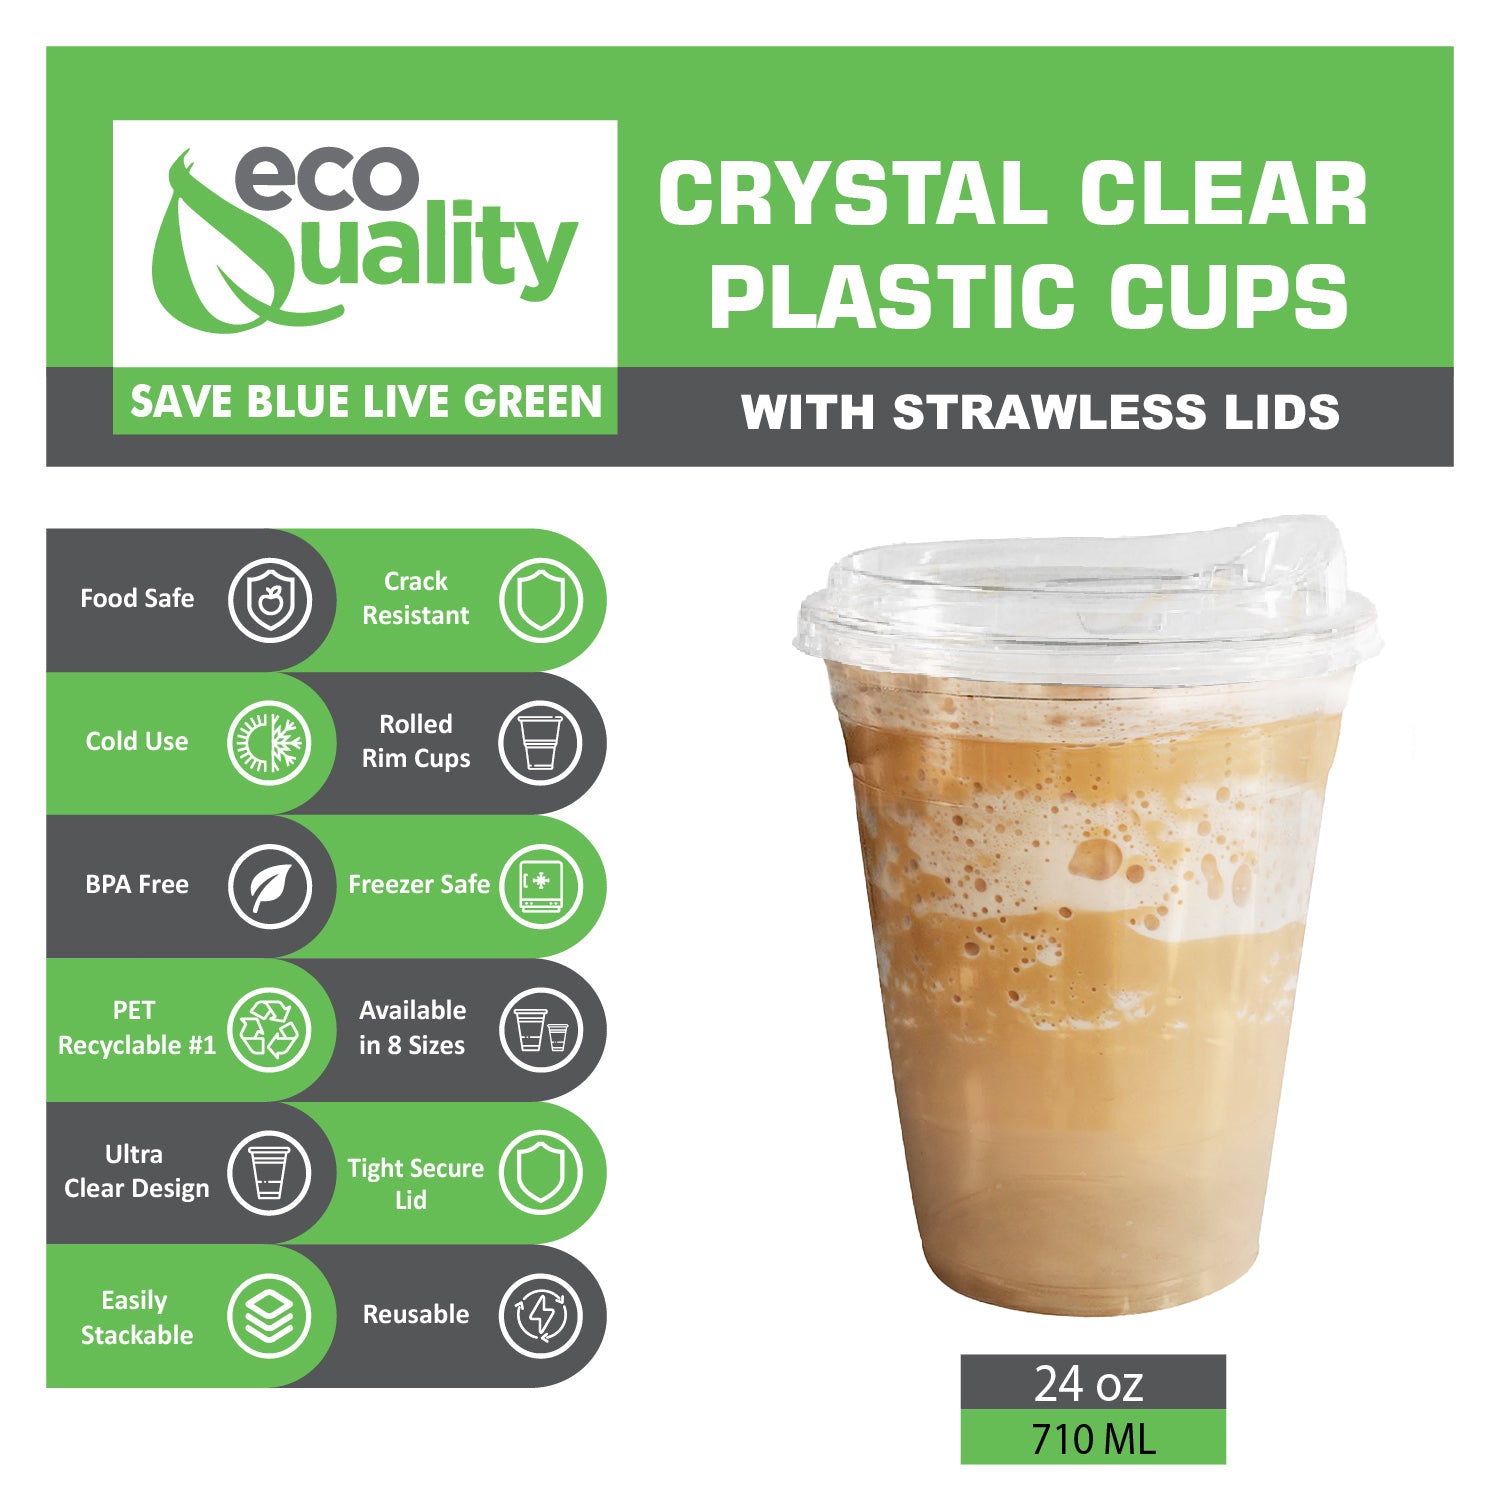 24oz Disposable Pet Clear Plastic Smoothie Cups with Sip Through Lids